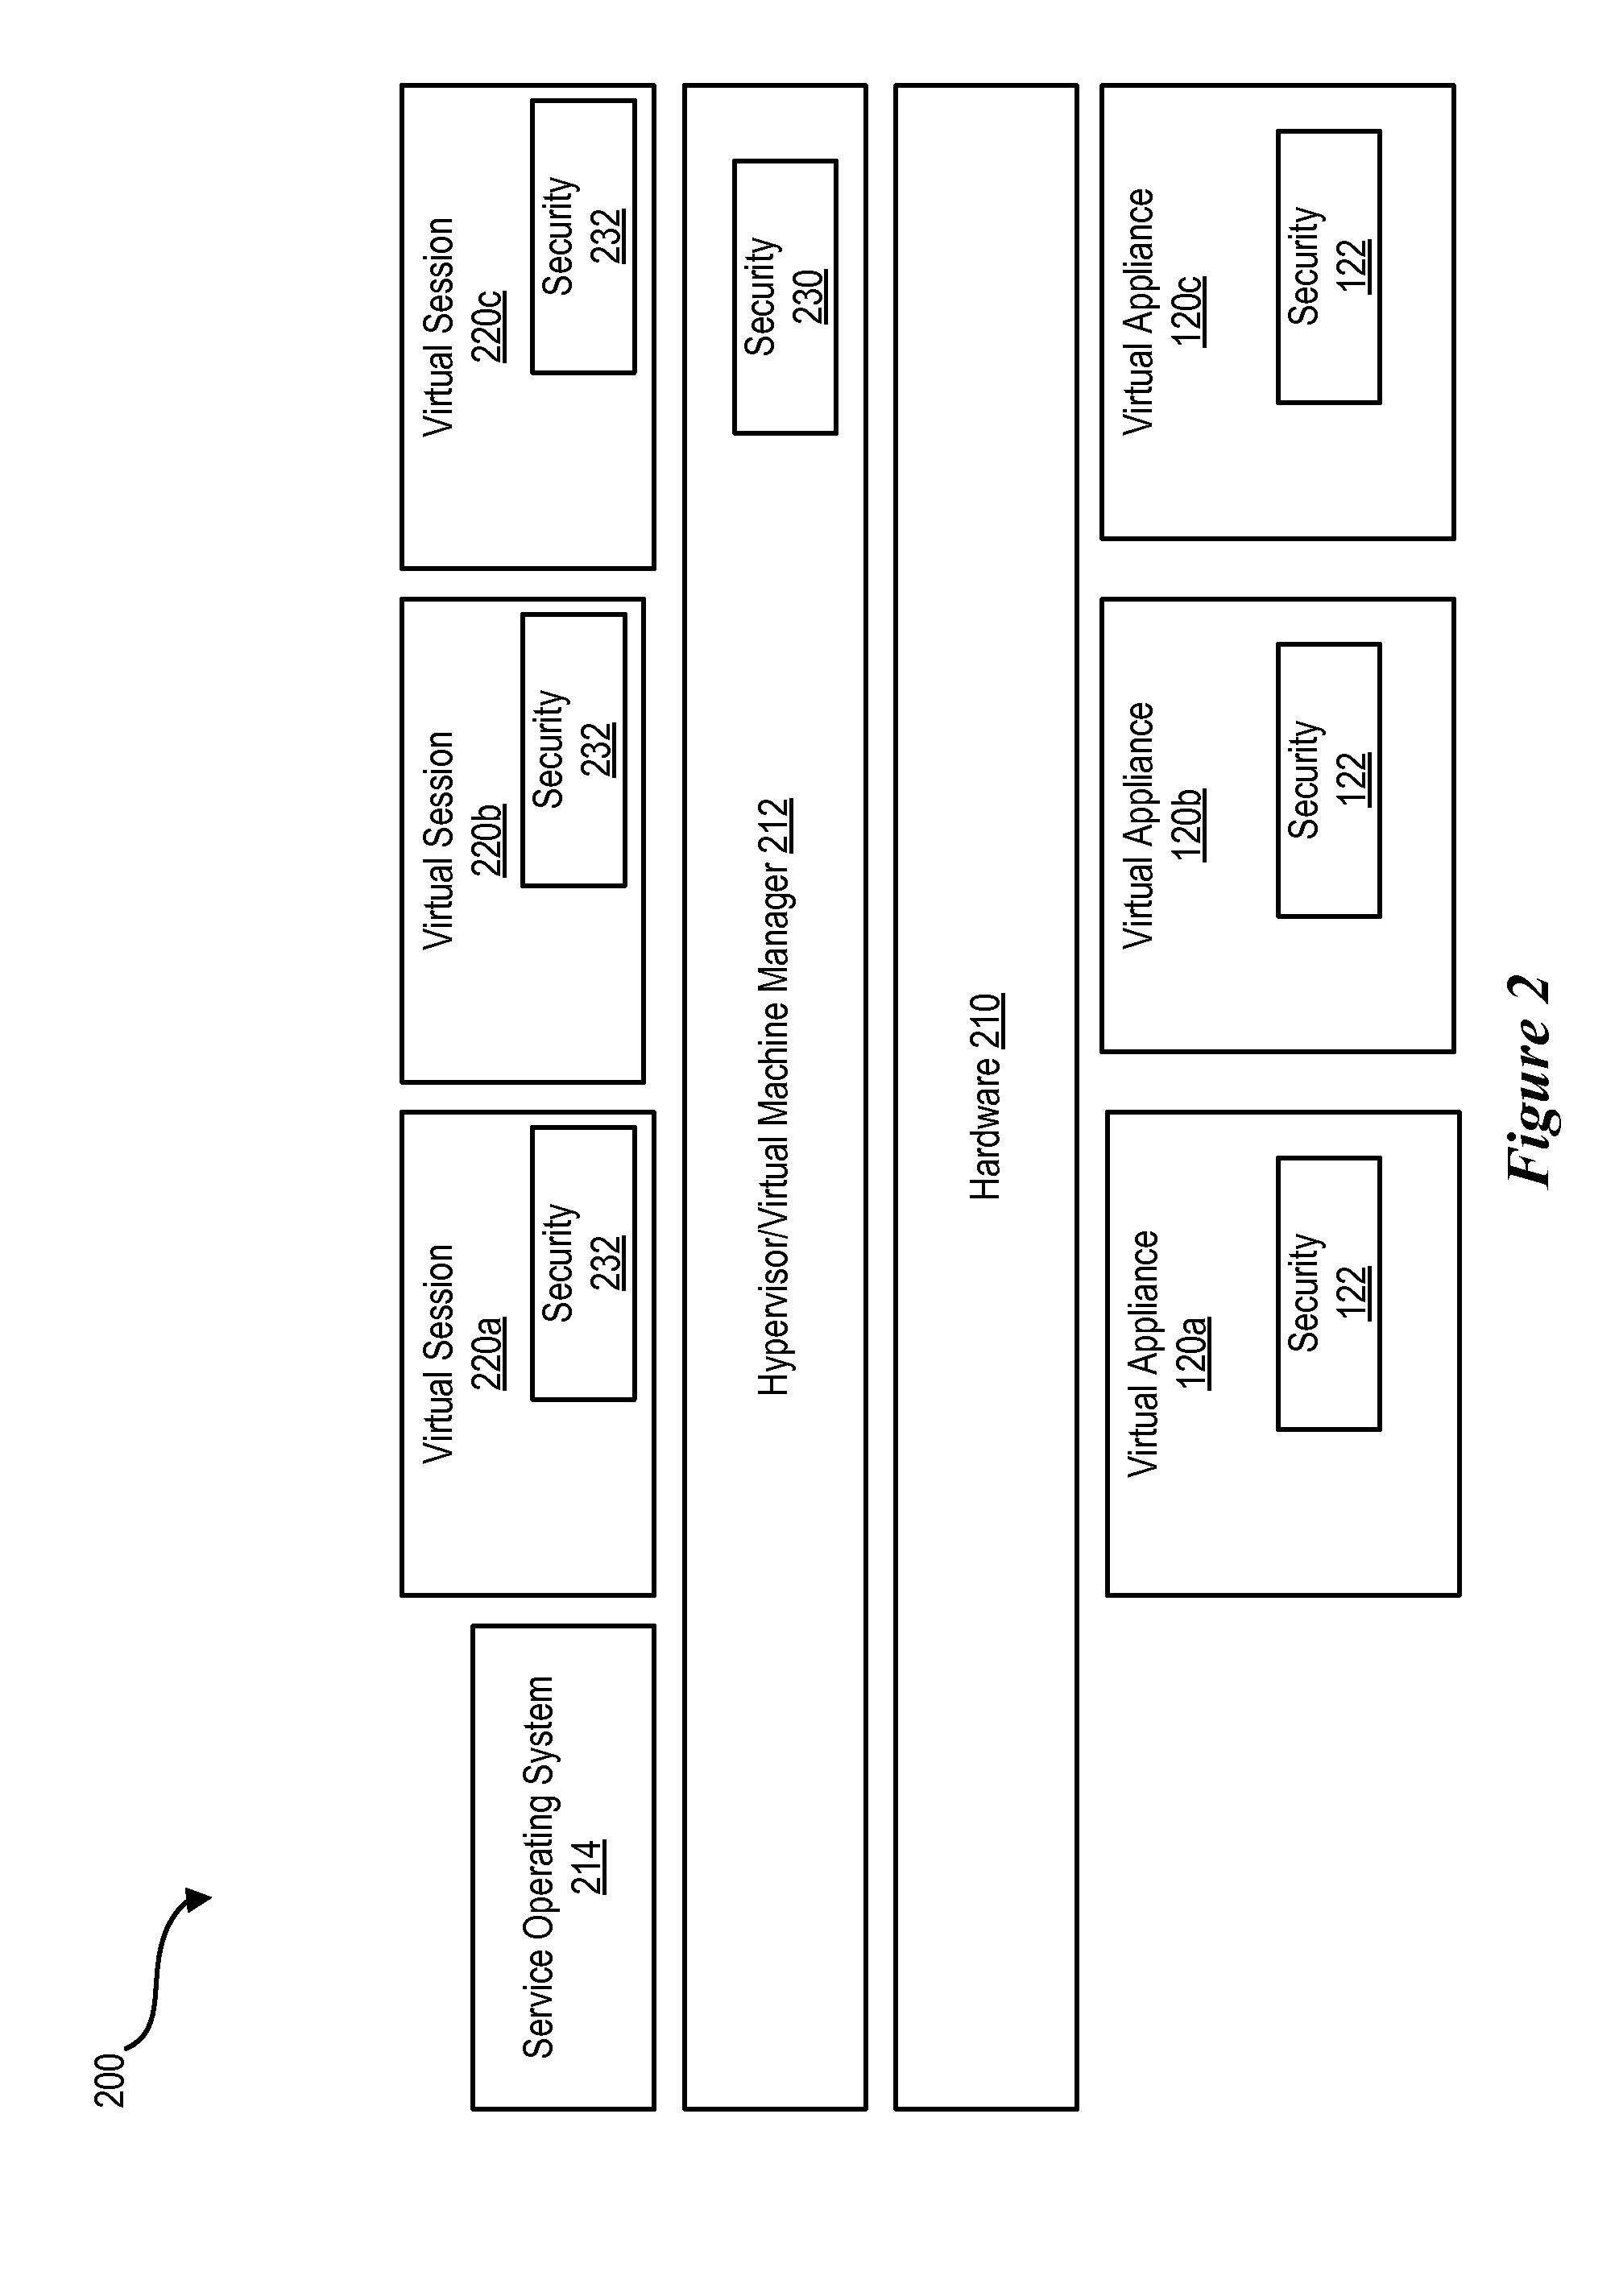 Method And Apparatus To Secure Contents On A Consumer Vital Appliance